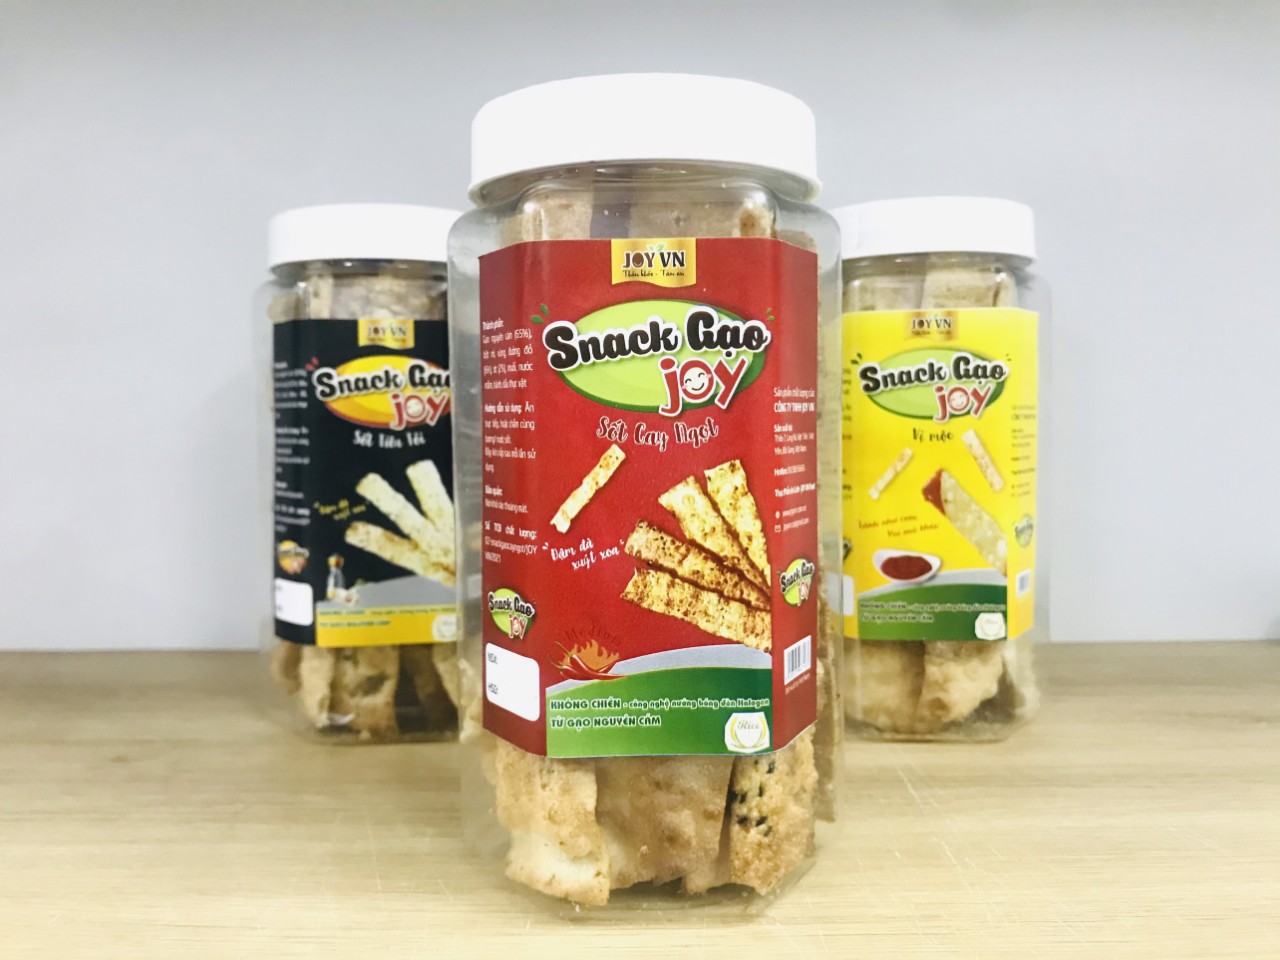 SNACK GẠO SỐT CAY NGỌT